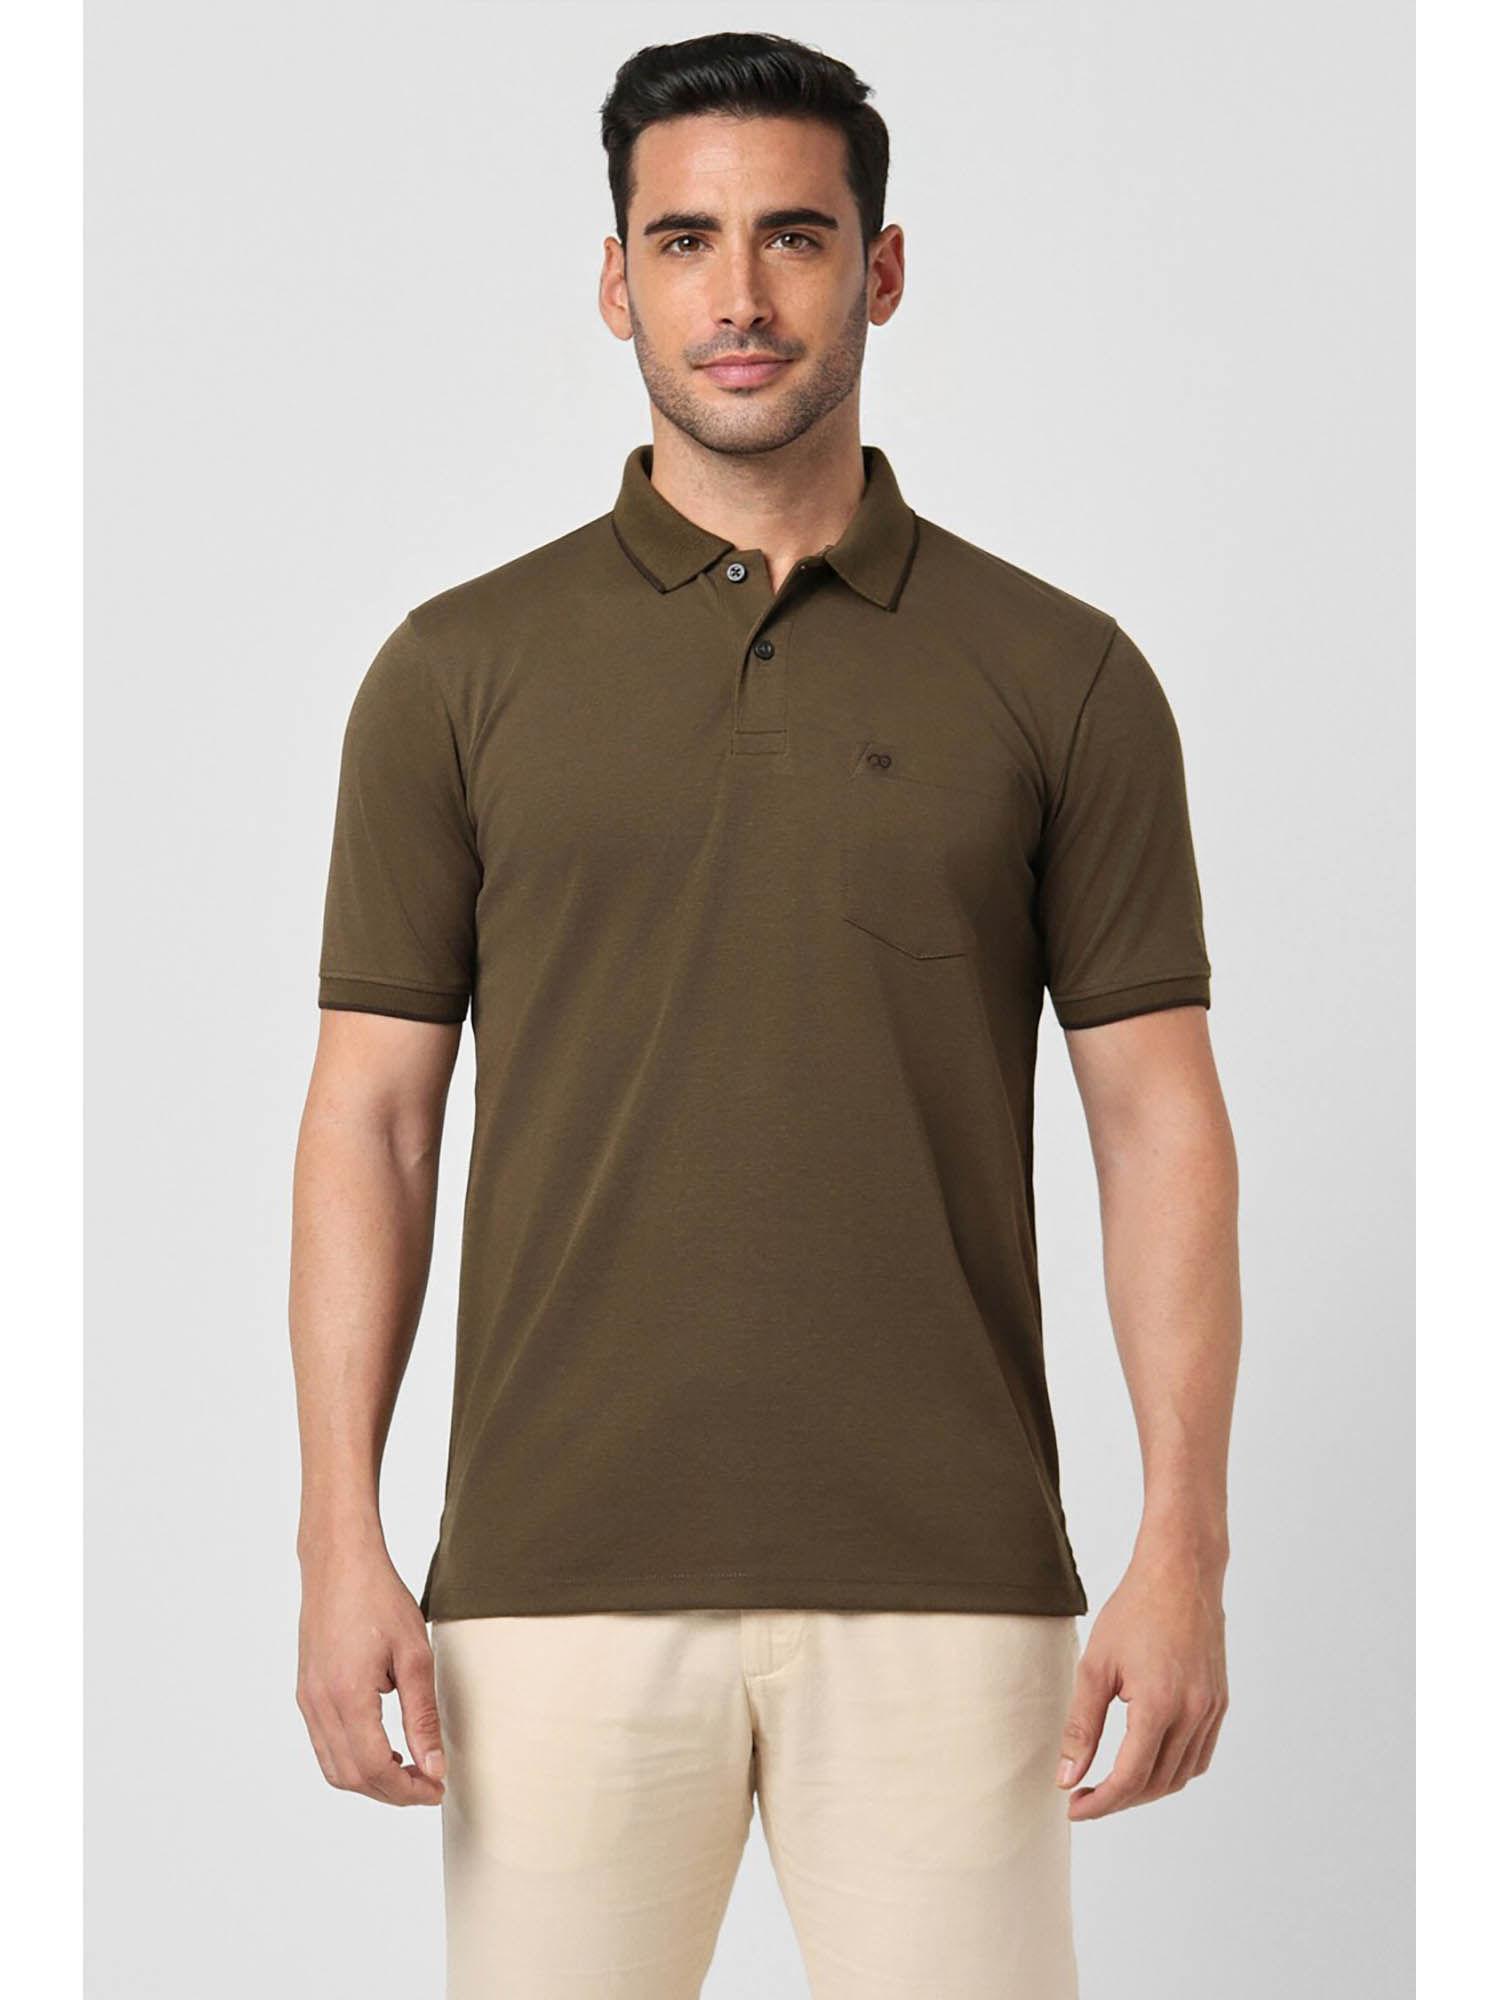 men-olive-solid-plain-collar-neck-polo-t-shirts